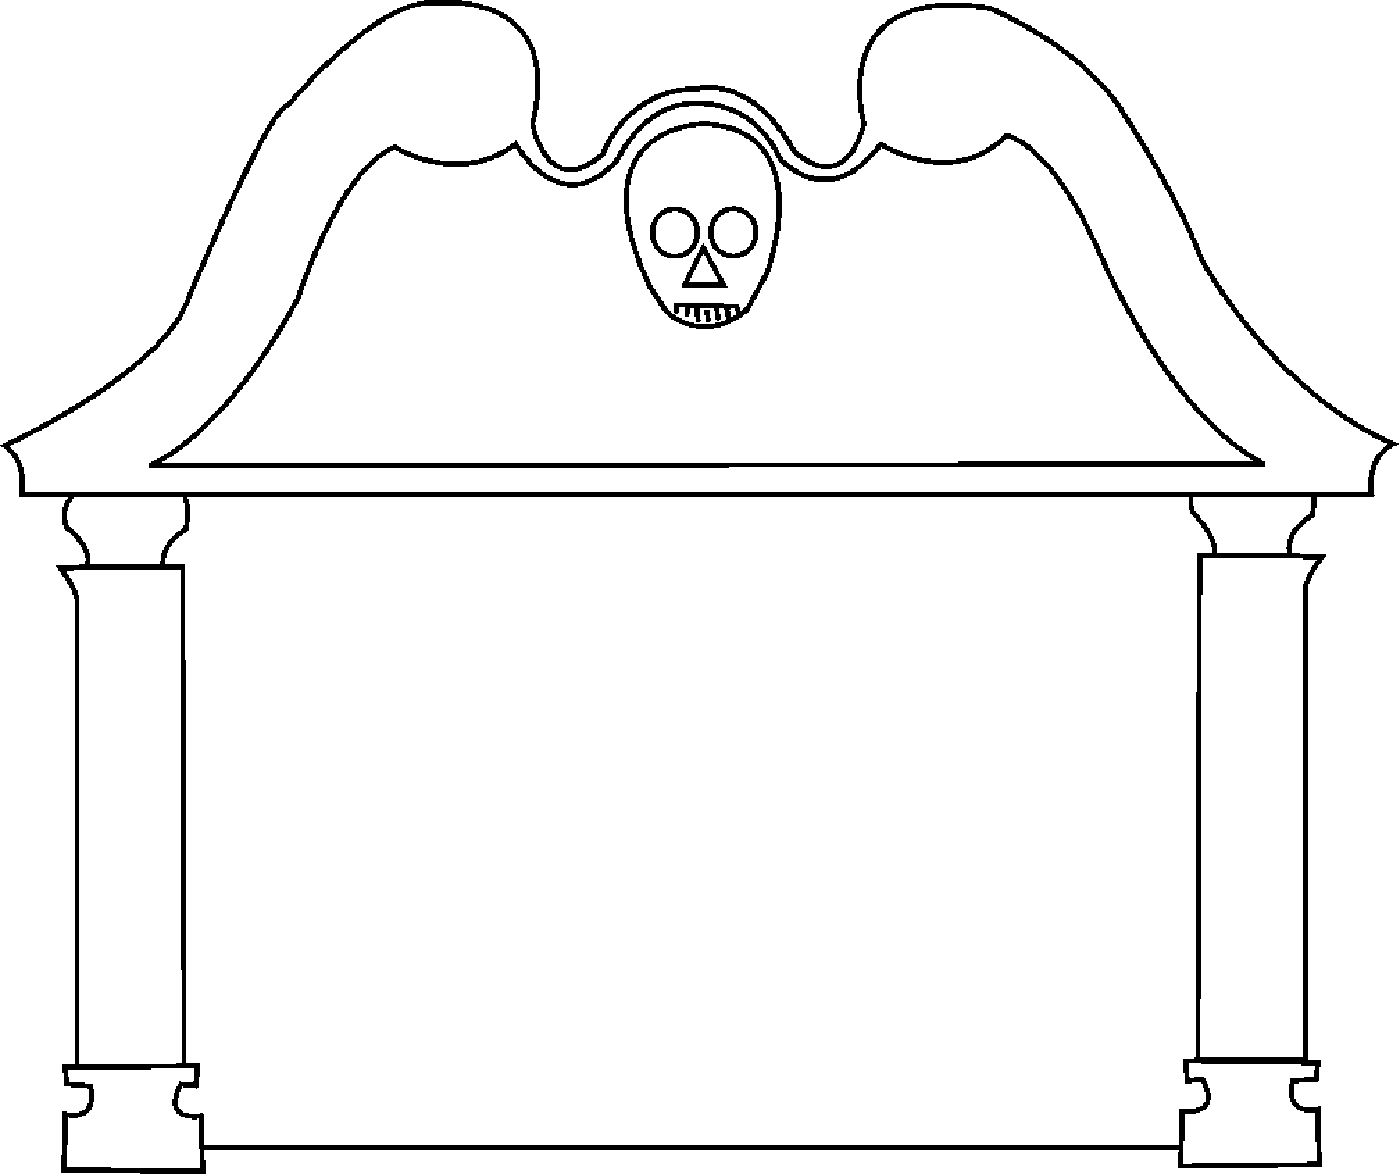 Blank Tombstone Template - ClipArt Best